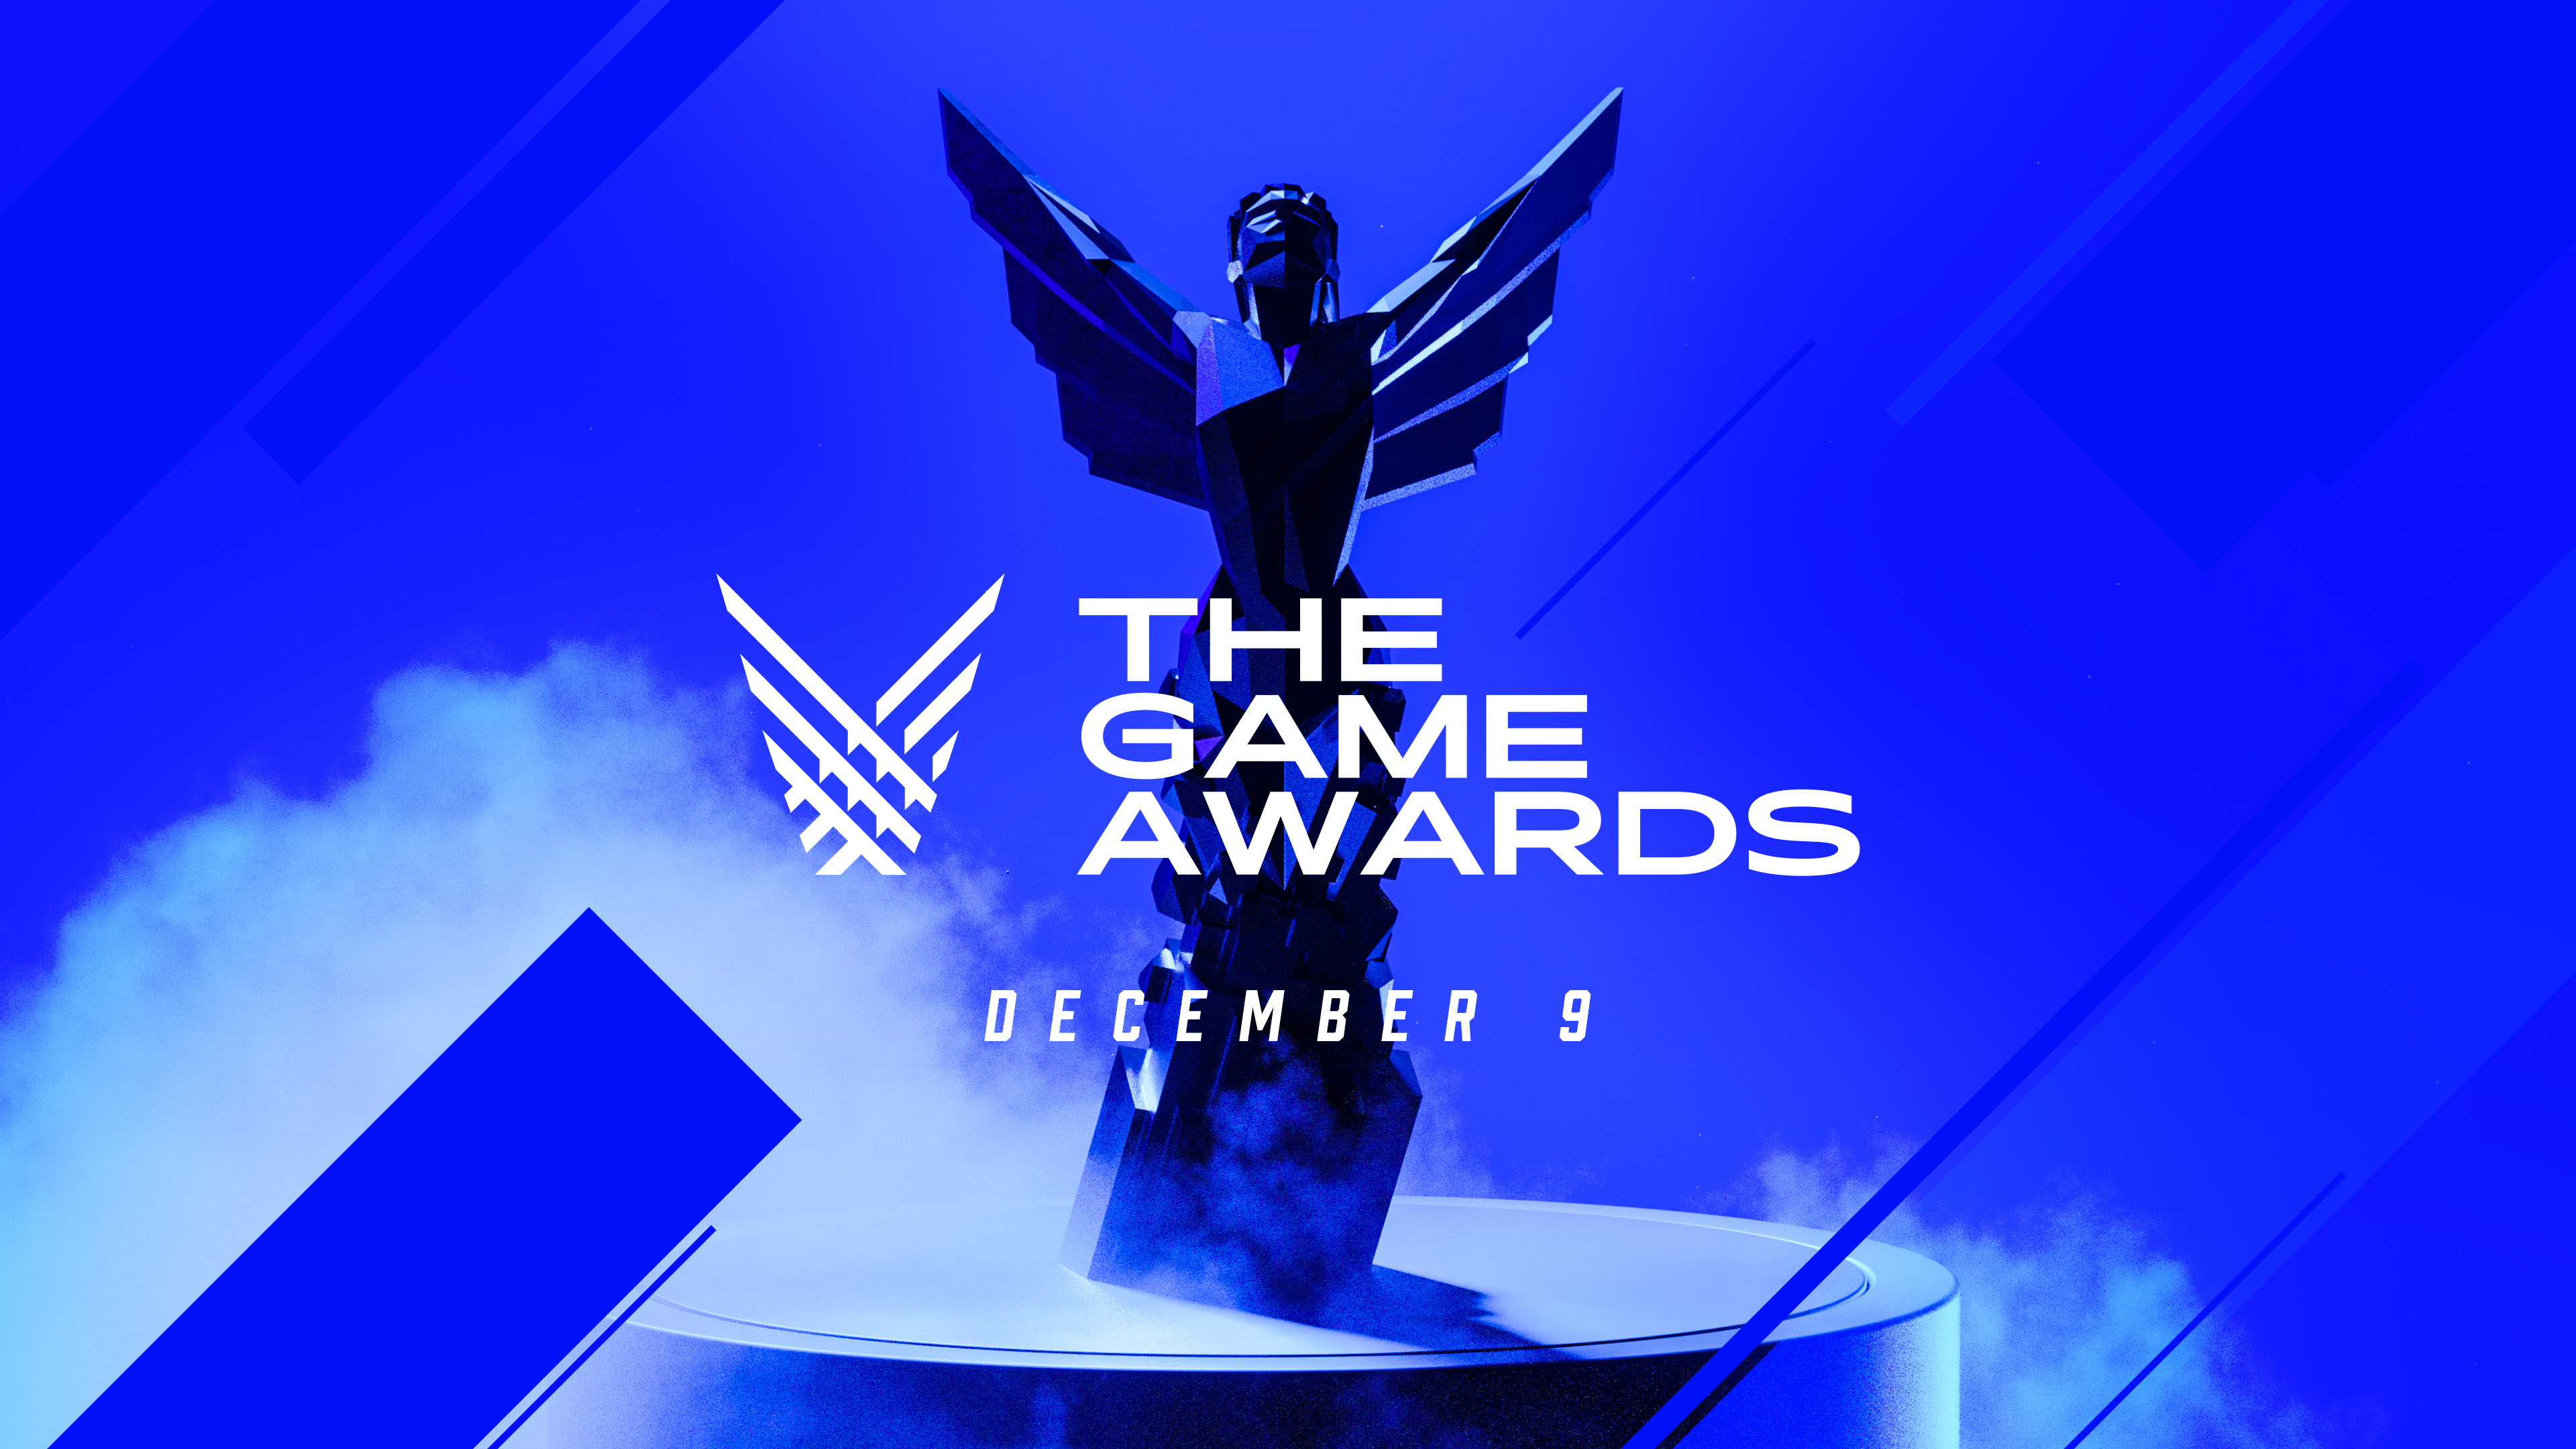 The Game Awards 2020 will still happen, but could be digital-only